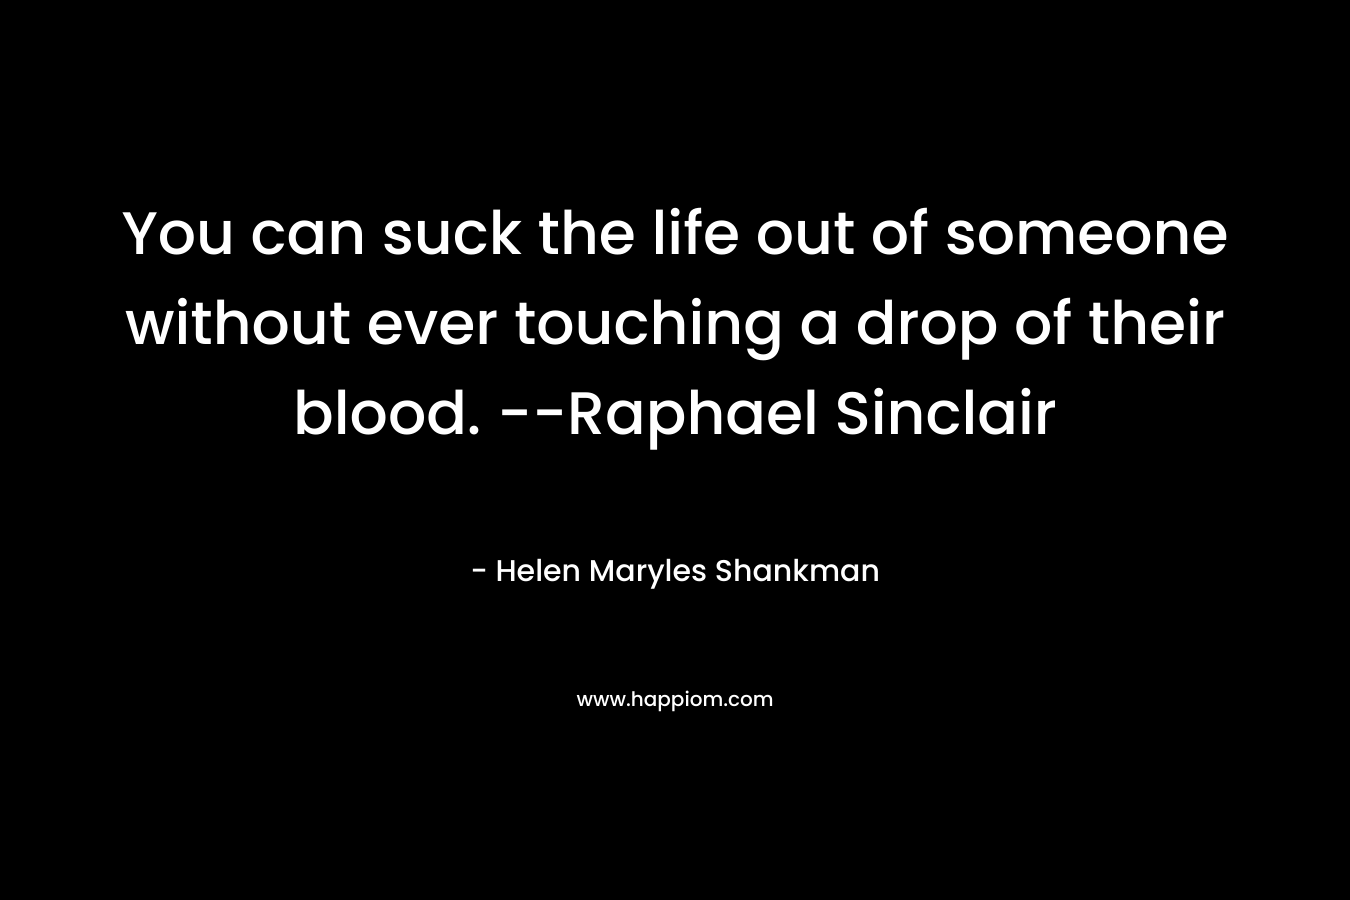 You can suck the life out of someone without ever touching a drop of their blood. --Raphael Sinclair